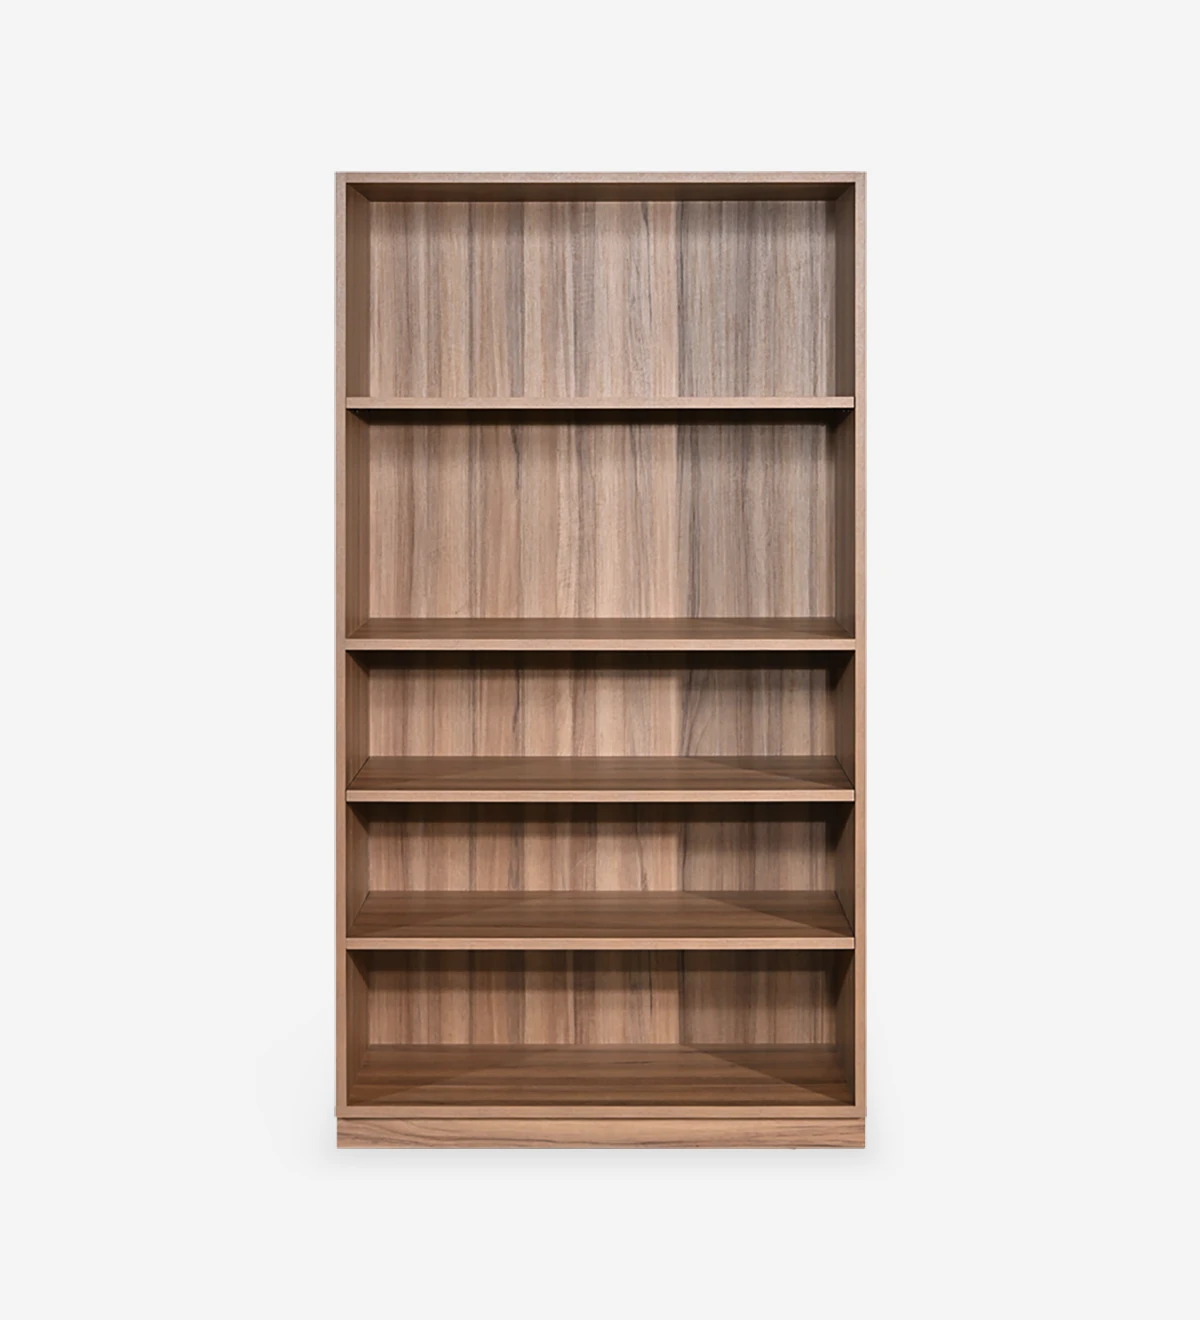 Low bookcase in walnut, with removable shelves.